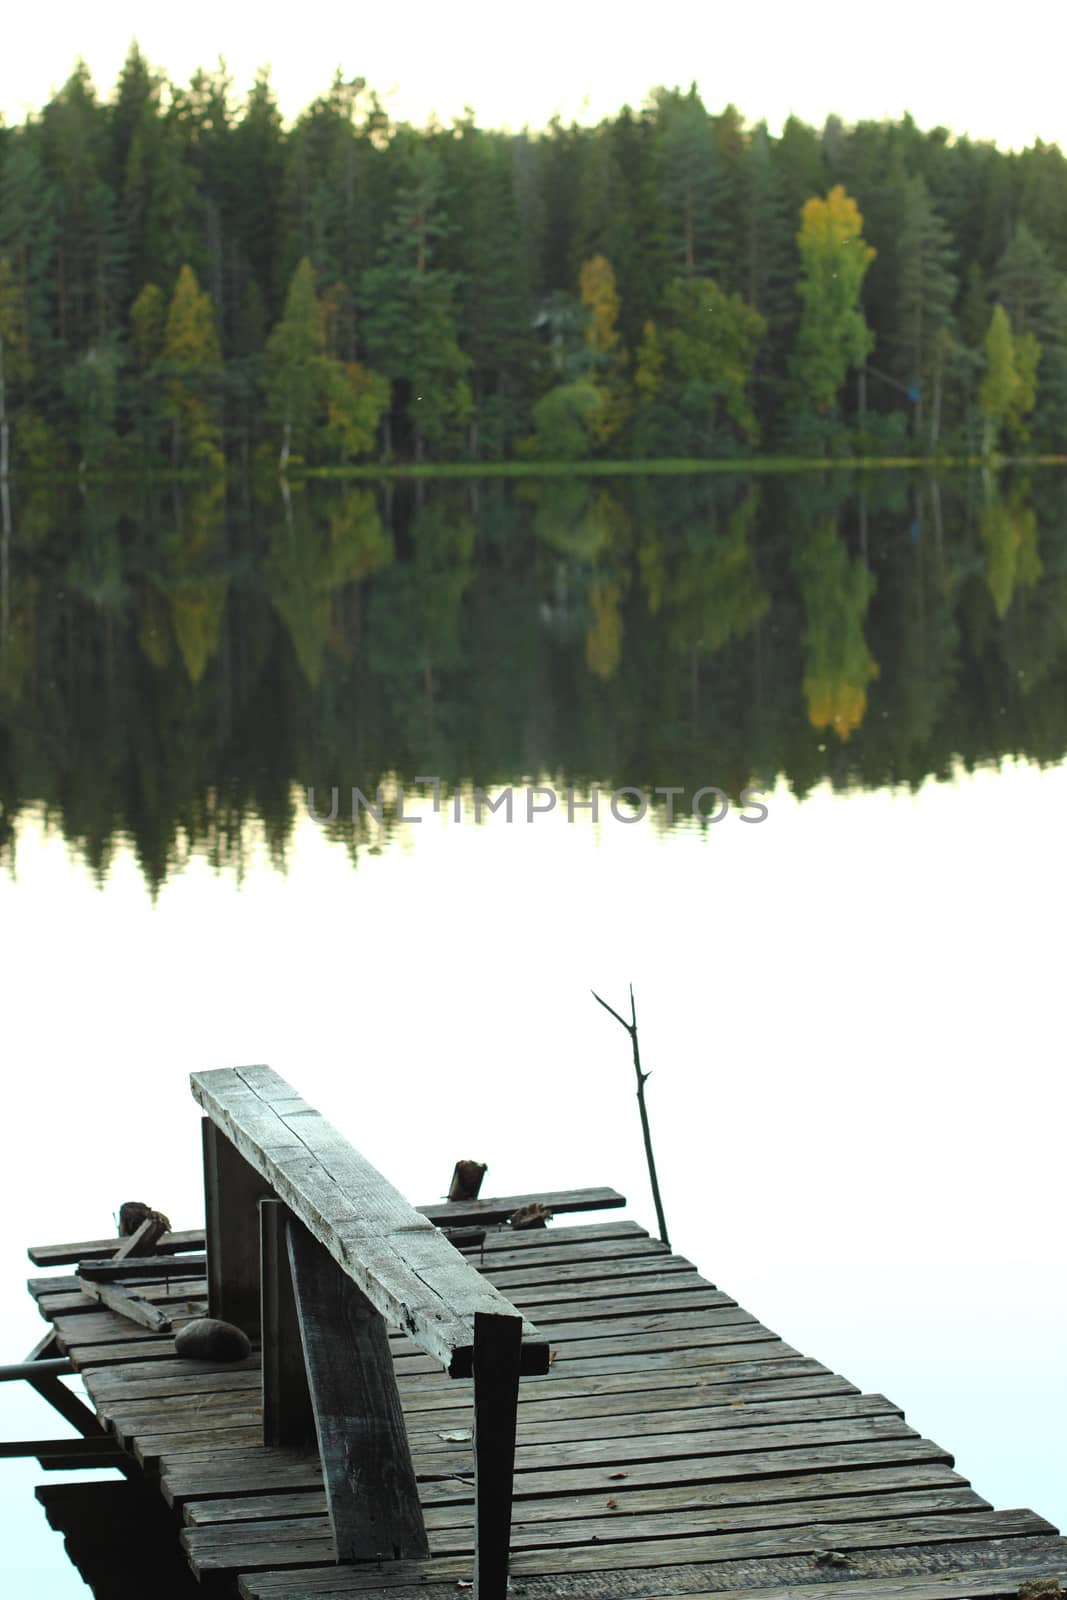 Old pier on a lake in the fall to catch fish